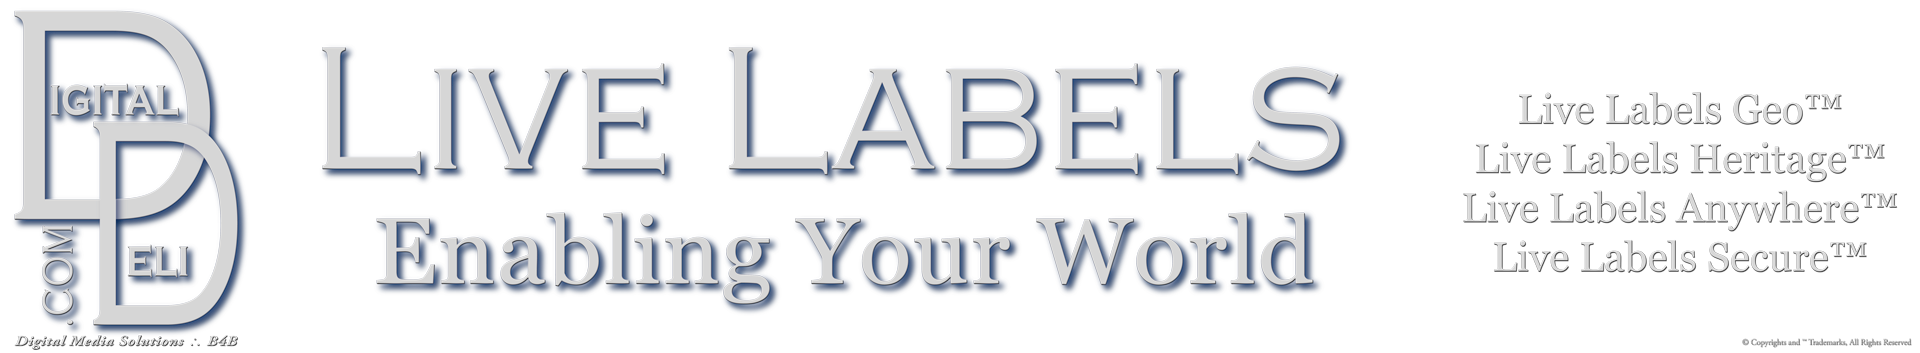 Live Labels™ Enabling Your World